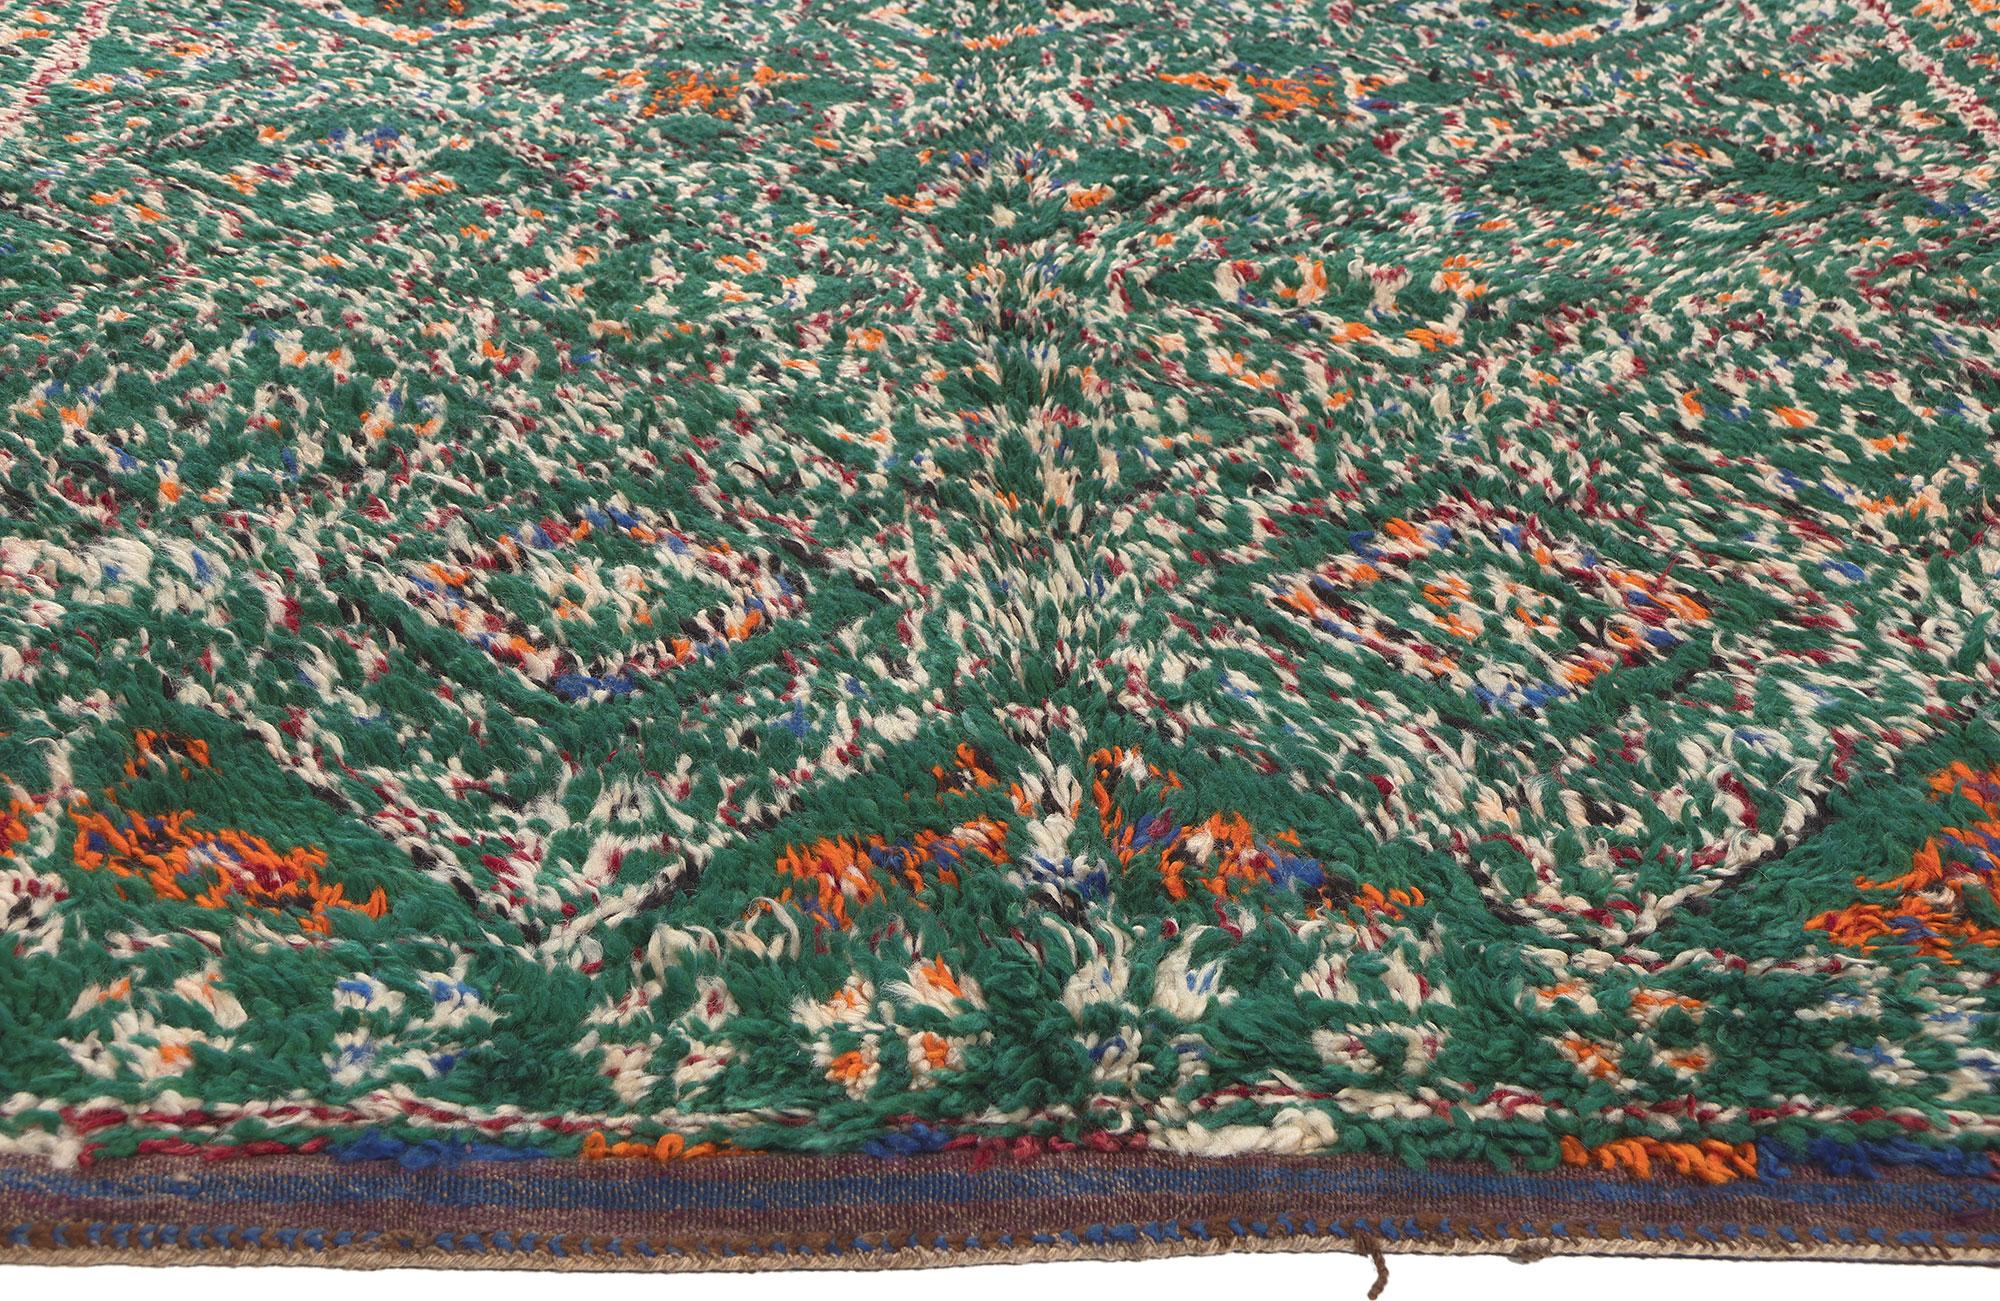 Vintage Green Beni MGuild Moroccan Rug, Cozy Nomad Meets Tribal Enchantment In Good Condition For Sale In Dallas, TX